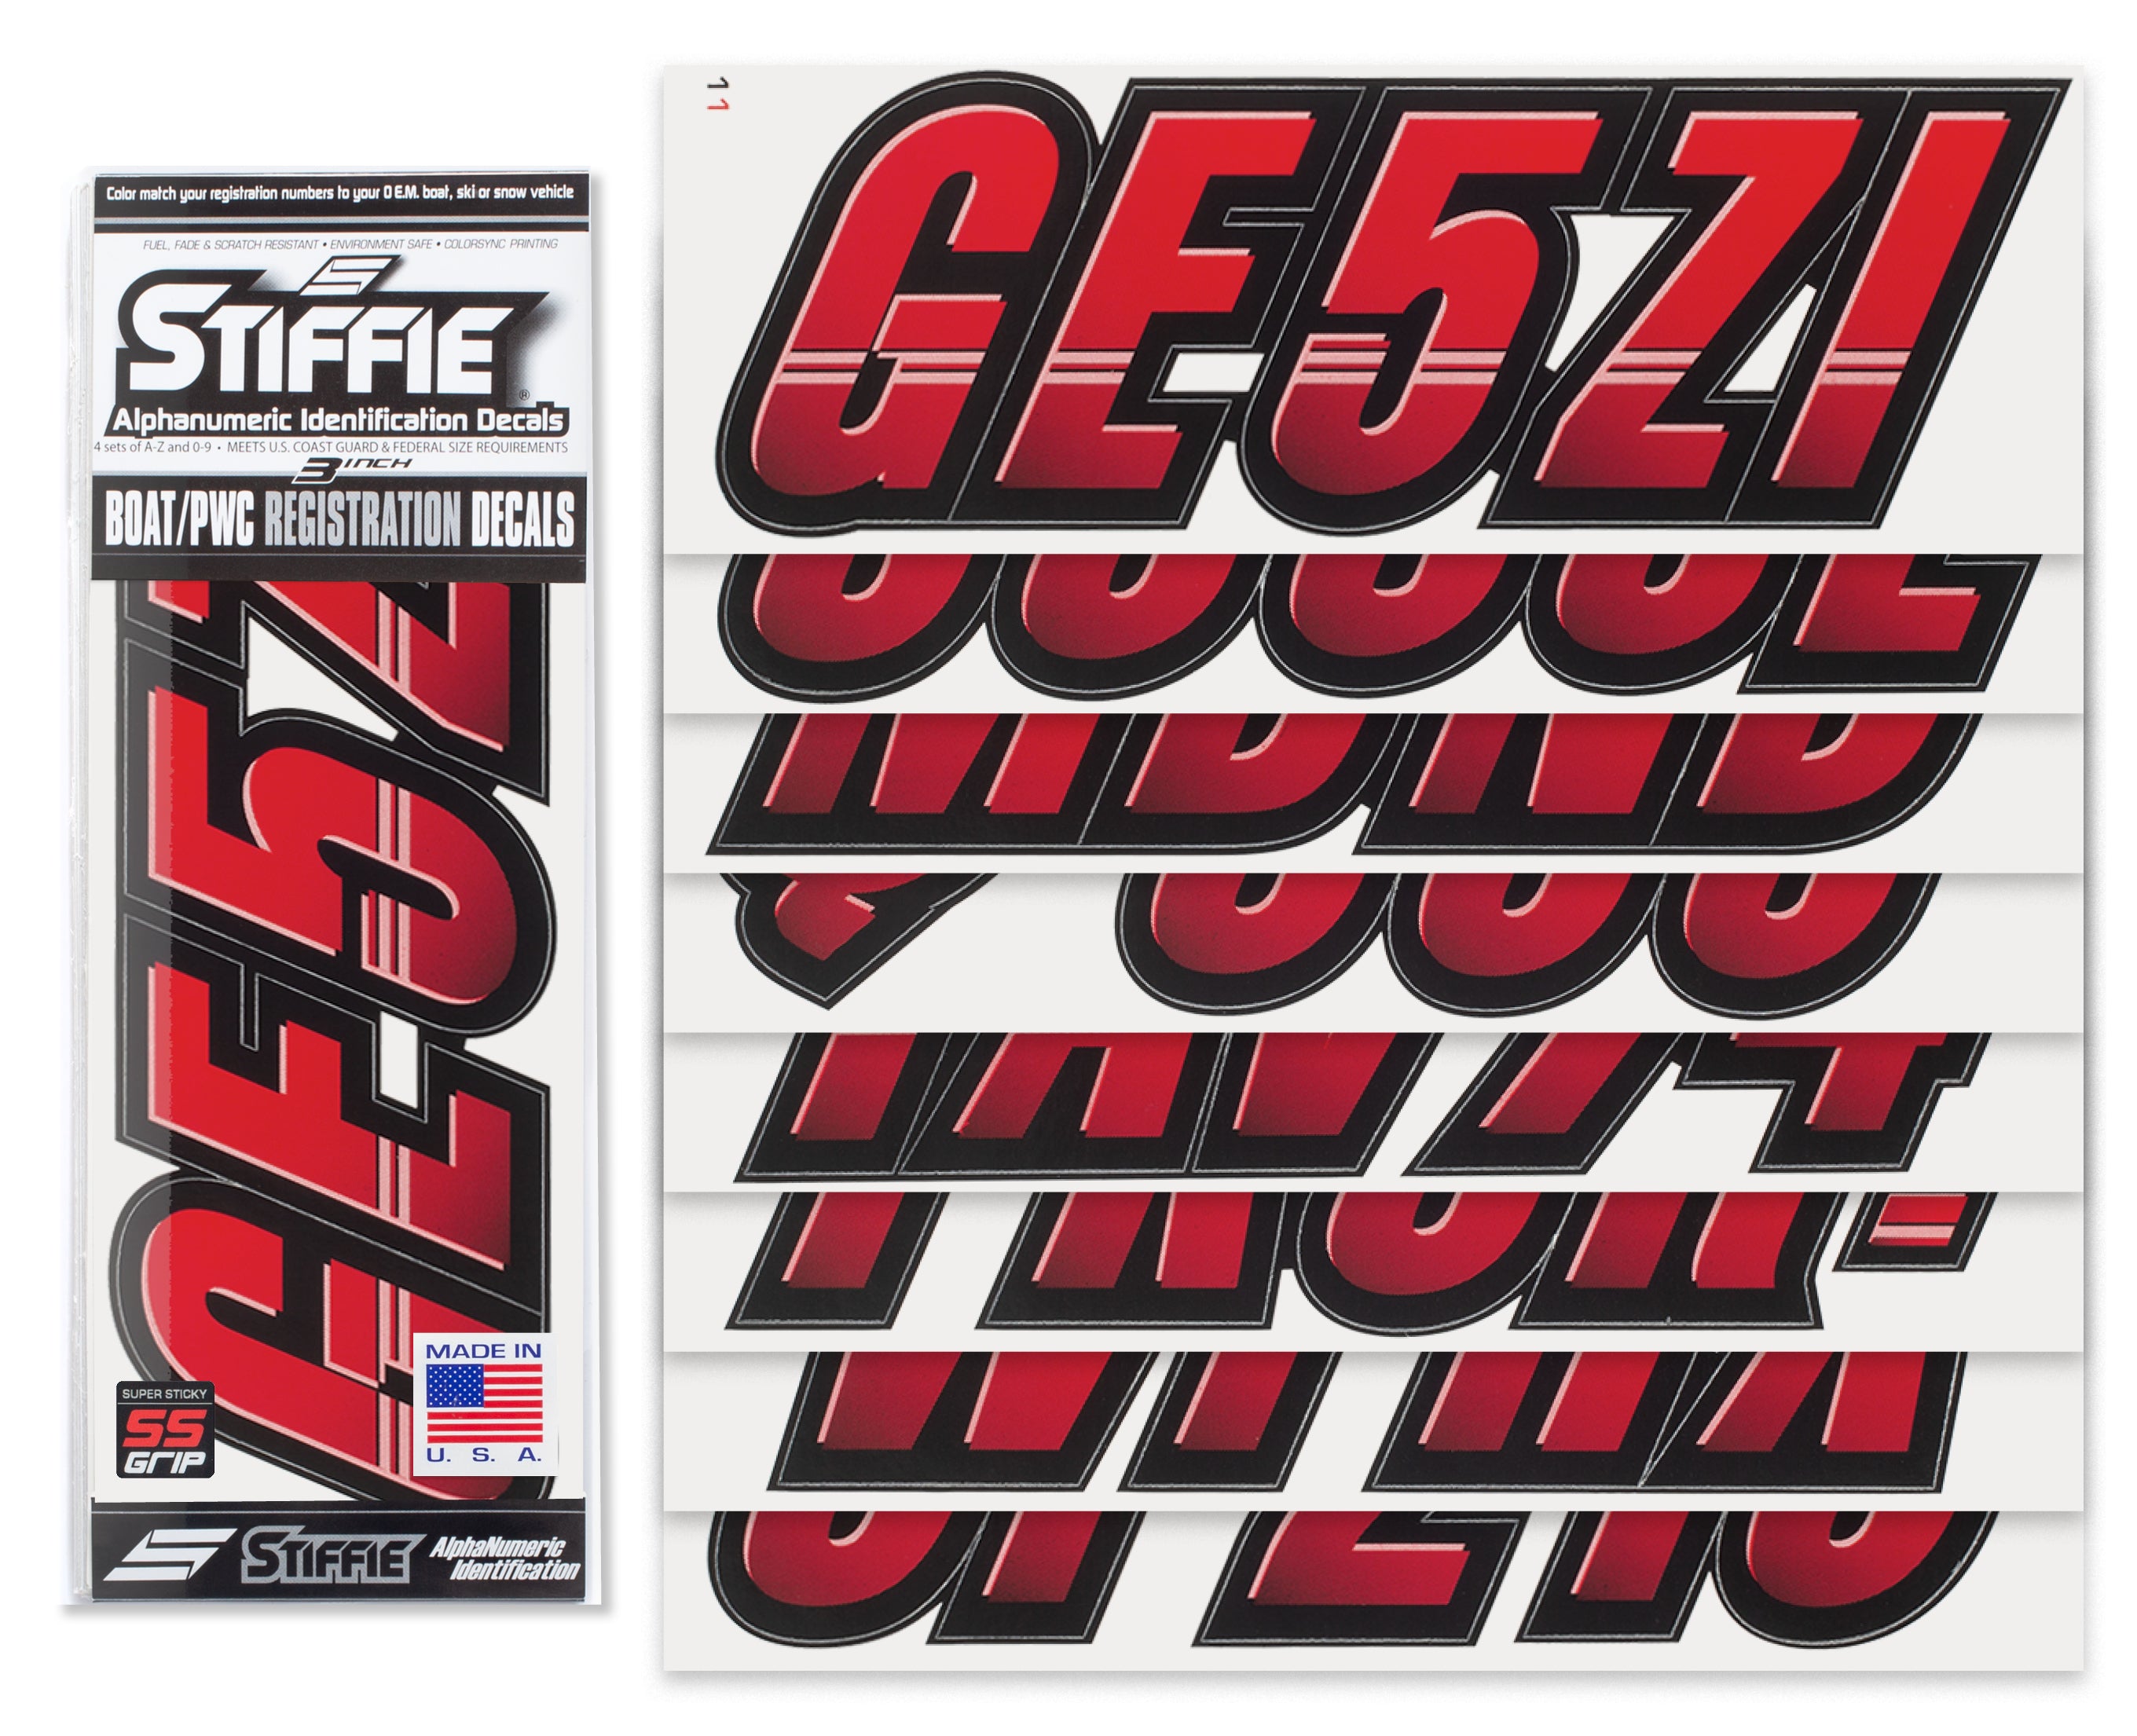 Stiffie Techtron Red/Black Super Sticky 3" Alpha Numeric Registration Identification Numbers Stickers Decals for Sea-Doo Spark, Inflatable Boats, Ribs, Hypalon/PVC, PWC and Boats.